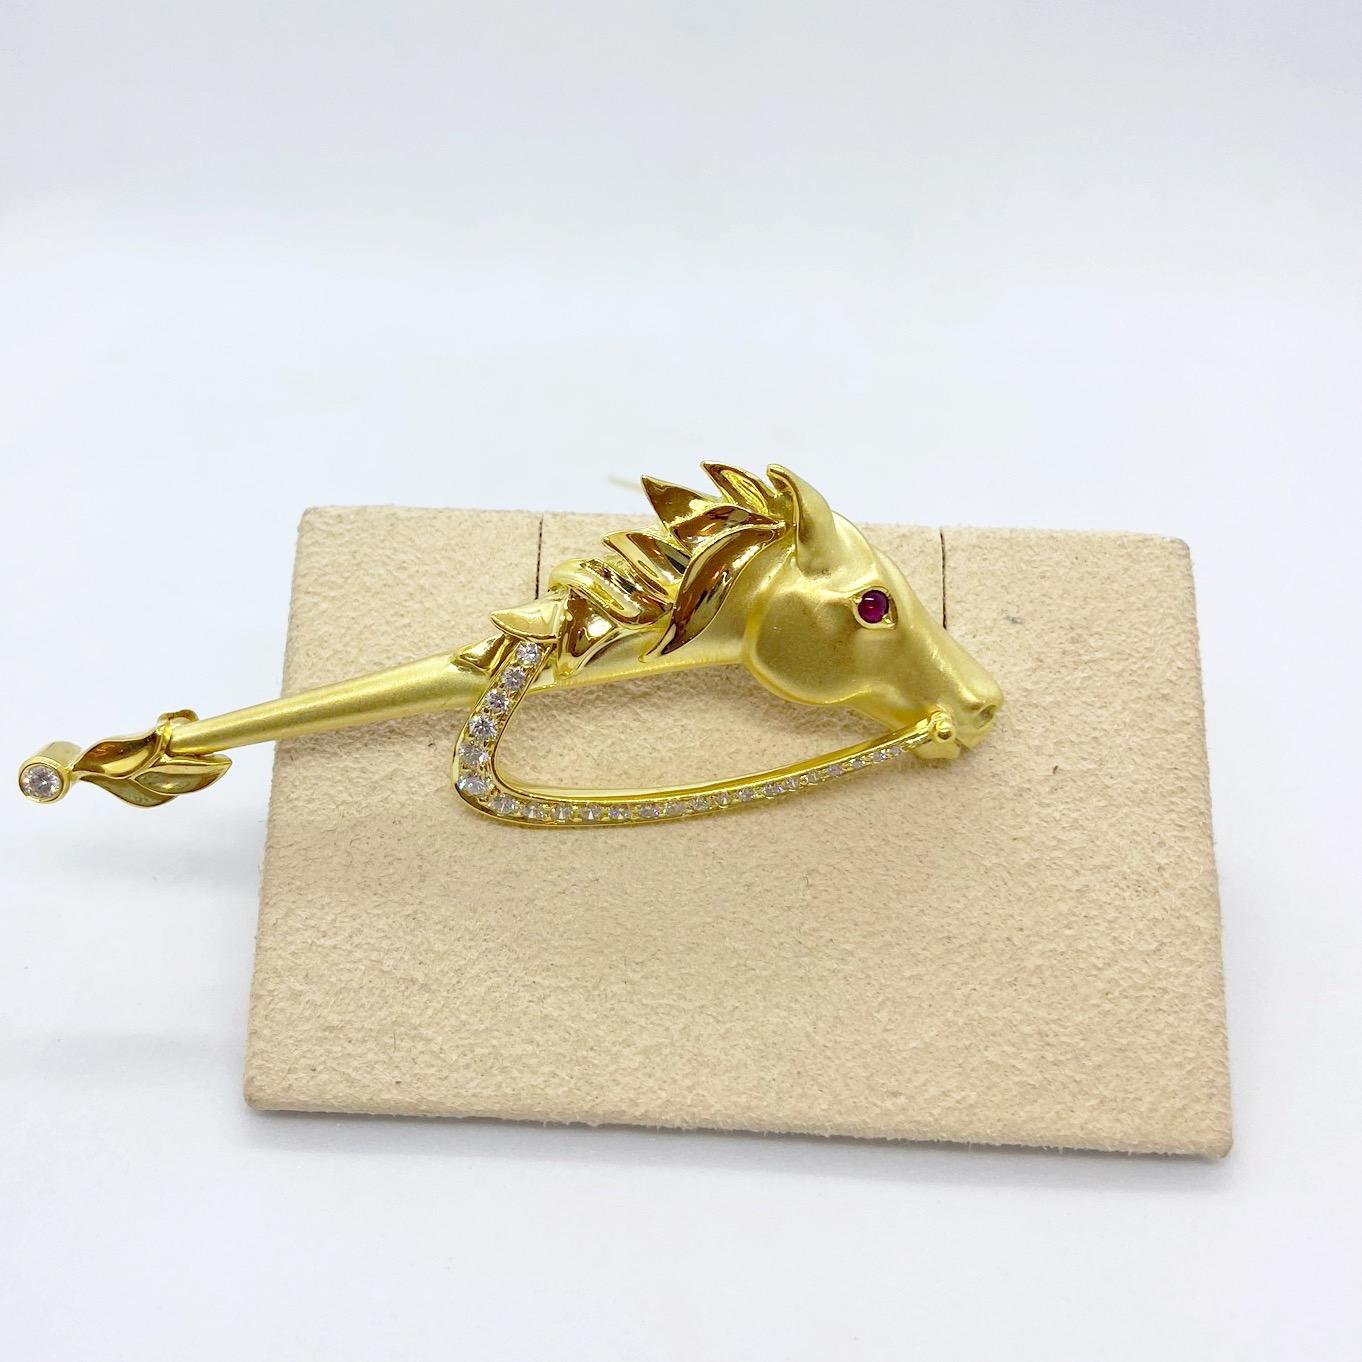 Reminiscent of a hobby horse, this 18 karat yellow gold brooch will be forever a classic.
It is designed in a satin finish with a contrasting hi polish for the horse's mane. The rein is set with round brilliant diamonds along with a single bezel set